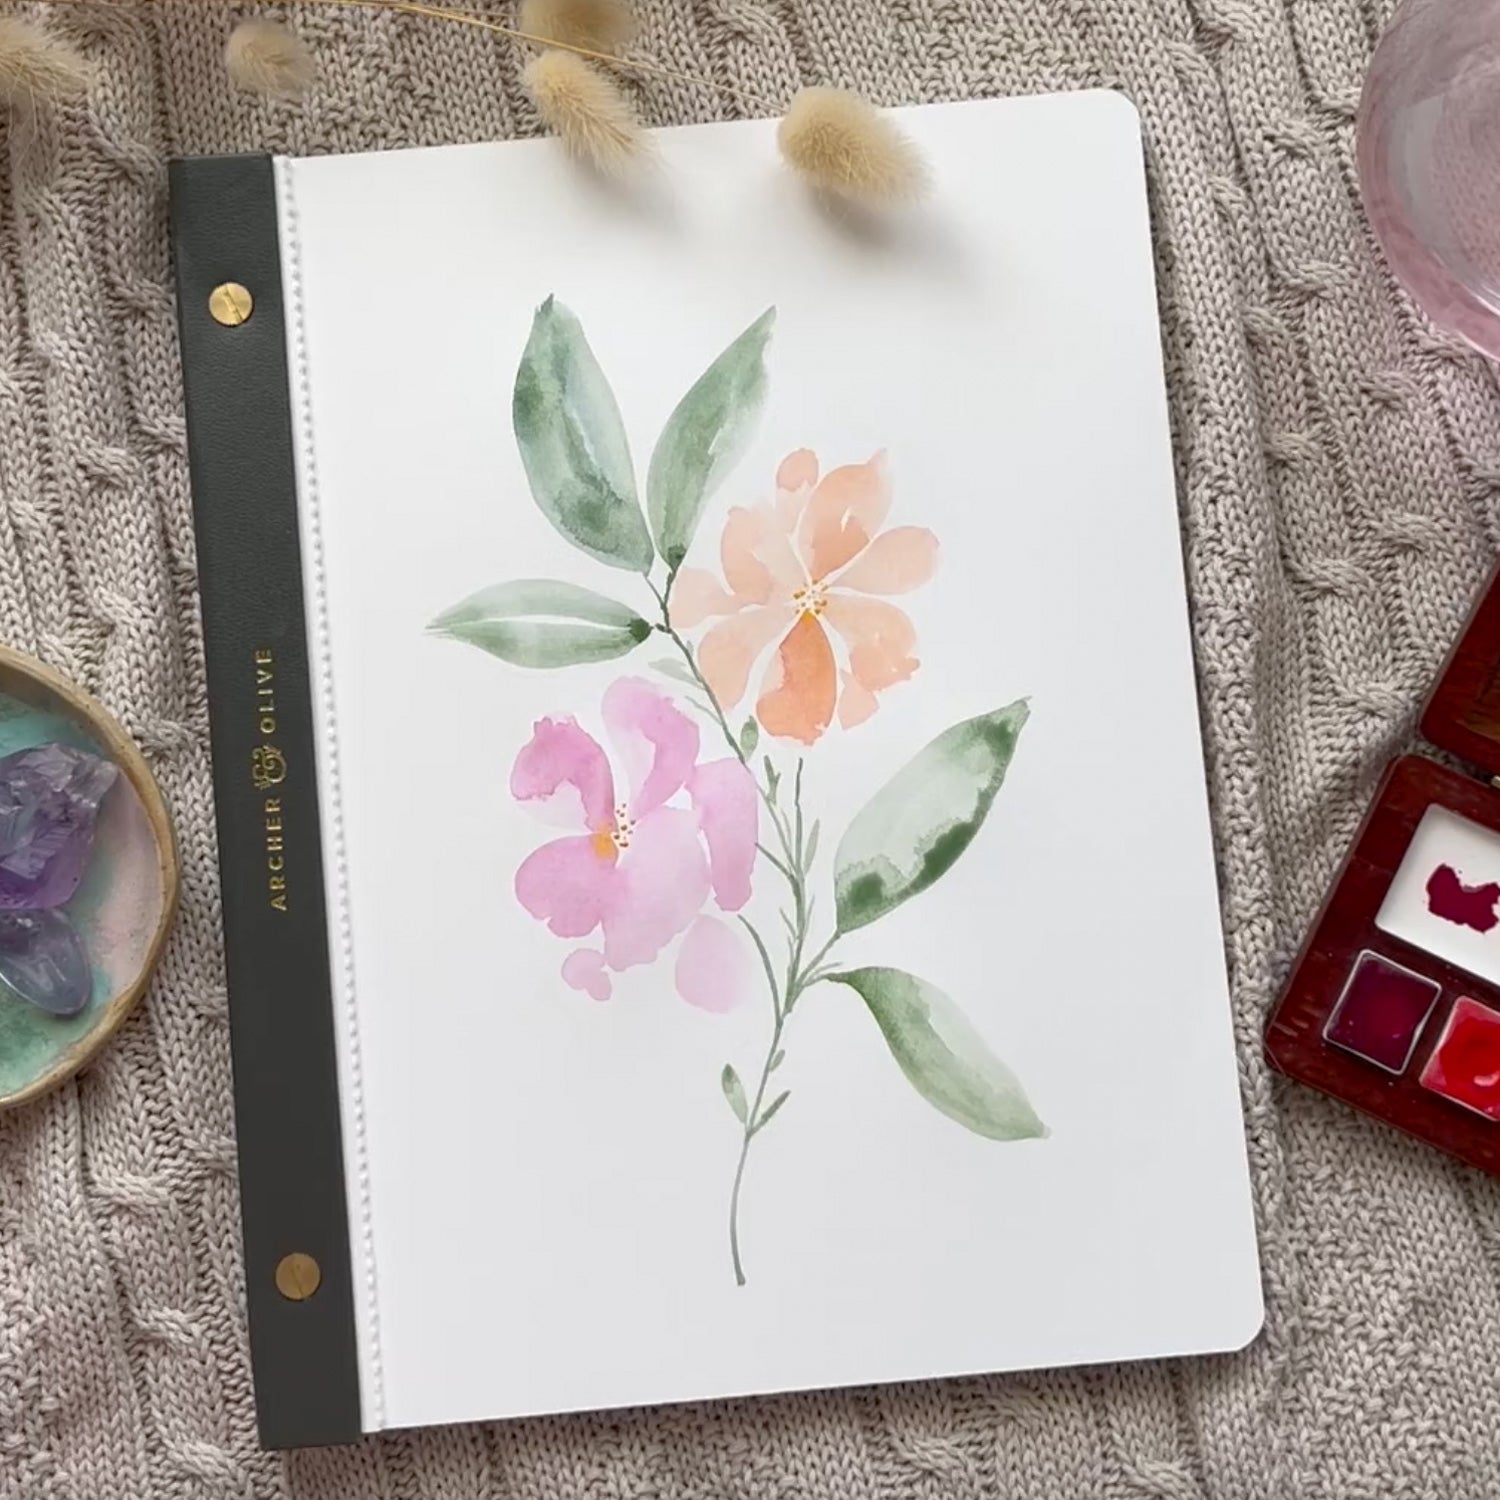 Romantic Florals Peony Watercolor for Beginners Easy Art Painting Kit DIY  Flower Paint by Number 